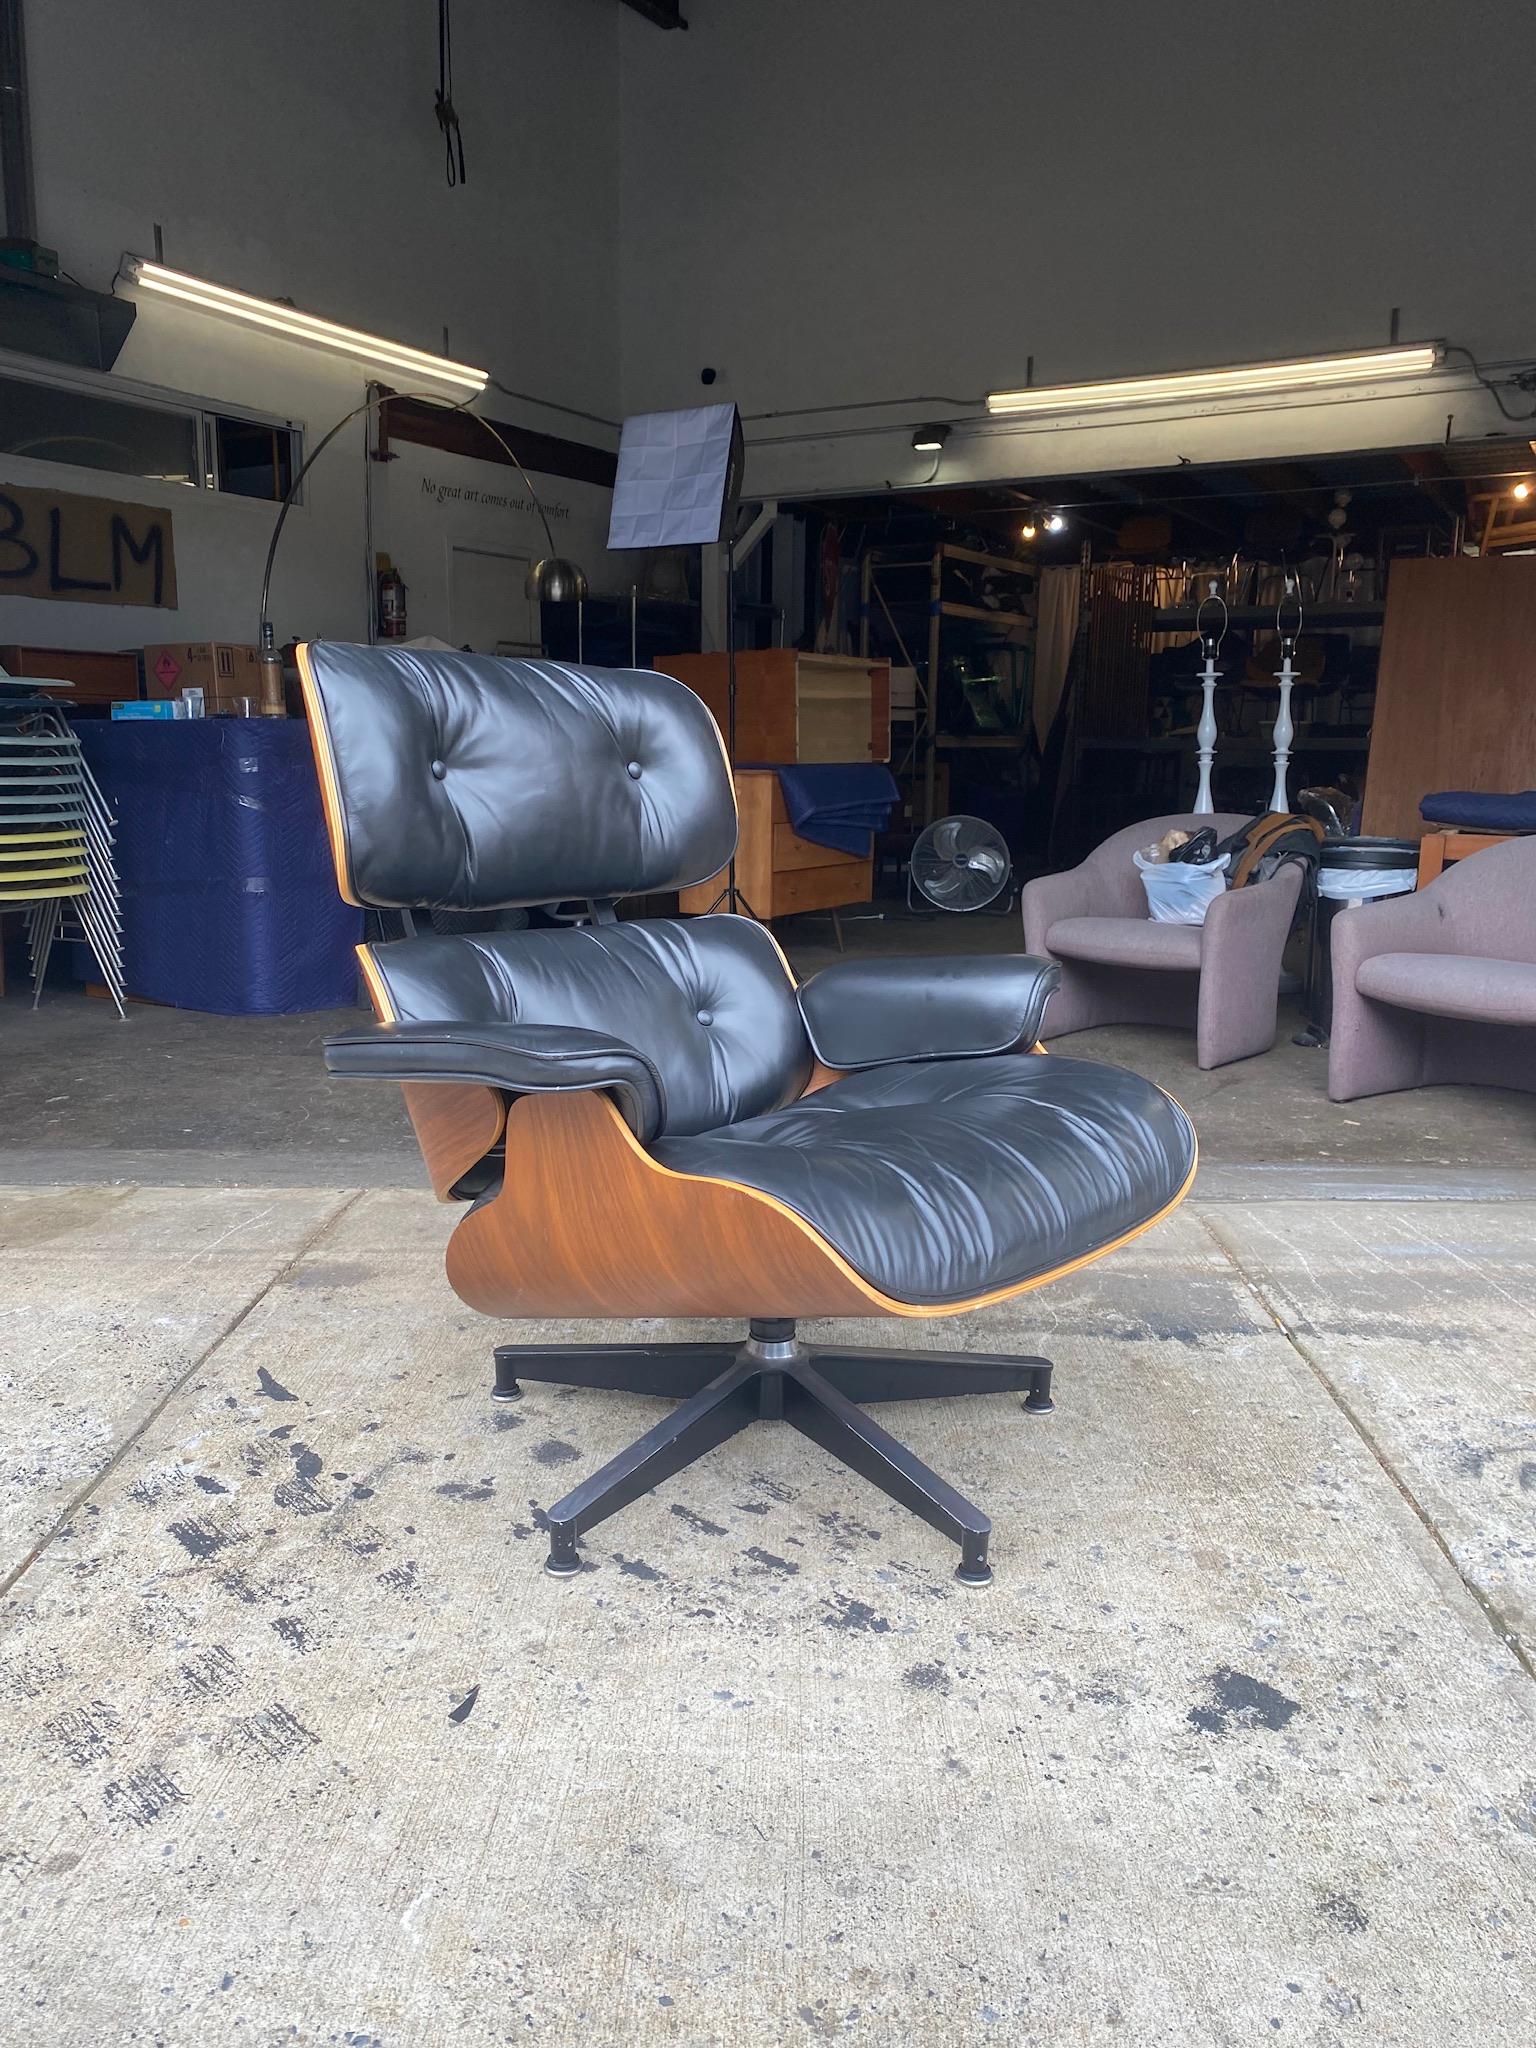 A stellar example of the classic Eames 670 lounge chair. Soft black leather cushions in walnut shells and aluminum swiveling base. All adjustable leveling glides intact. Gorgeous walnut wood tones and detailed grain features. Signed and guaranteed